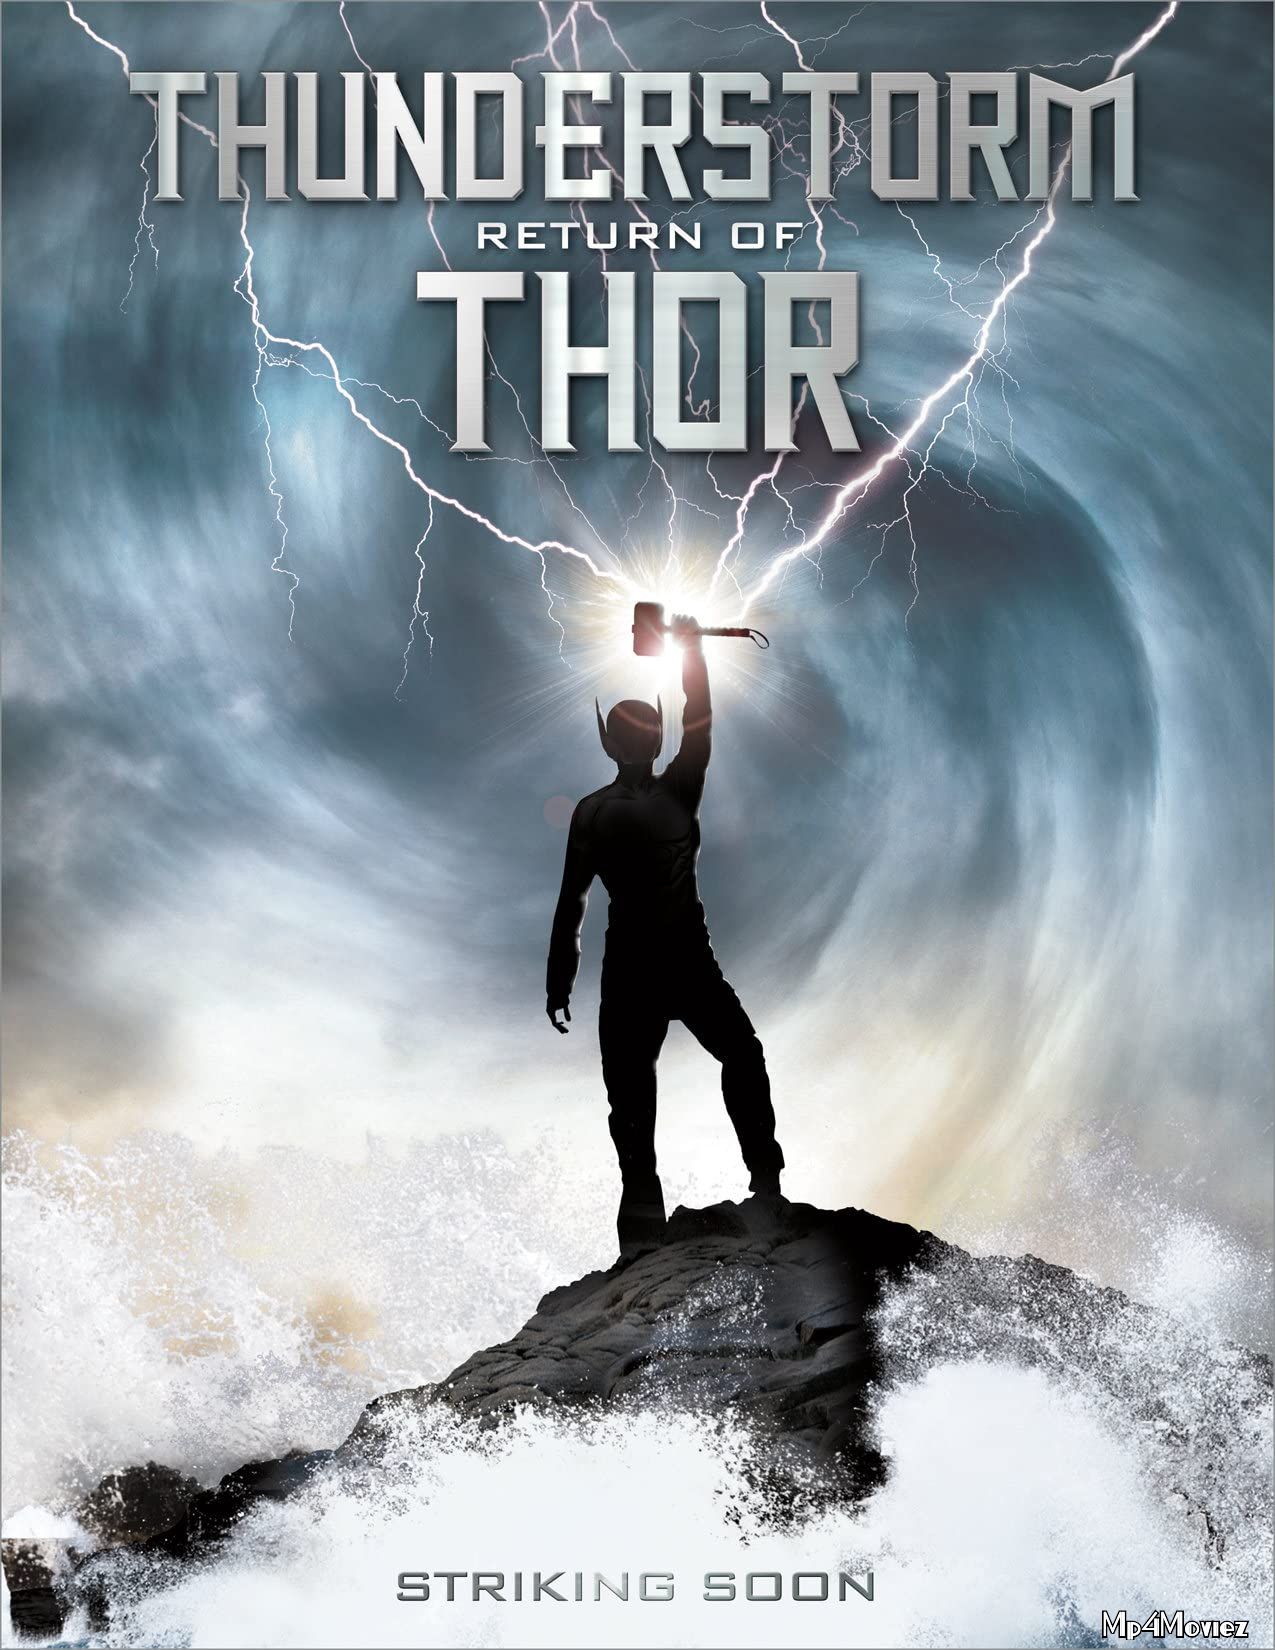 Thunderstorm The Return of Thor (2011) Hindi Dubbed BRRip download full movie